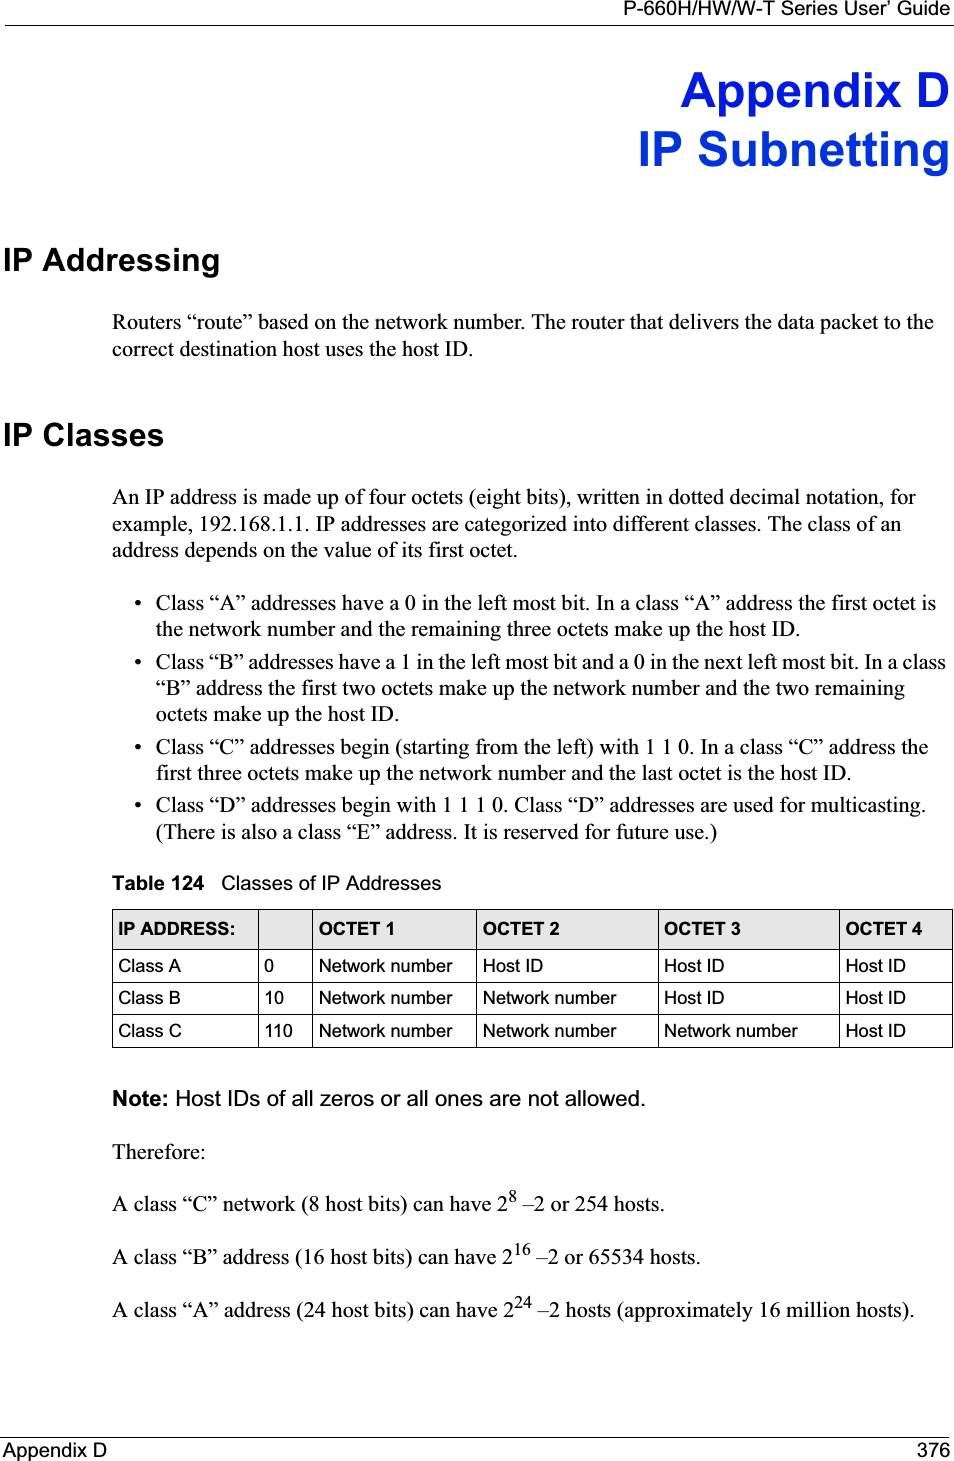 P-660H/HW/W-T Series User’ GuideAppendix D 376Appendix DIP SubnettingIP Addressing Routers “route” based on the network number. The router that delivers the data packet to the correct destination host uses the host ID. IP ClassesAn IP address is made up of four octets (eight bits), written in dotted decimal notation, for example, 192.168.1.1. IP addresses are categorized into different classes. The class of an address depends on the value of its first octet. • Class “A” addresses have a 0 in the left most bit. In a class “A” address the first octet is the network number and the remaining three octets make up the host ID.• Class “B” addresses have a 1 in the left most bit and a 0 in the next left most bit. In a class “B” address the first two octets make up the network number and the two remaining octets make up the host ID.• Class “C” addresses begin (starting from the left) with 1 1 0. In a class “C” address the first three octets make up the network number and the last octet is the host ID.• Class “D” addresses begin with 1 1 1 0. Class “D” addresses are used for multicasting. (There is also a class “E” address. It is reserved for future use.) Note: Host IDs of all zeros or all ones are not allowed.Therefore:A class “C” network (8 host bits) can have 28 –2 or 254 hosts. A class “B” address (16 host bits) can have 216 –2 or 65534 hosts. A class “A” address (24 host bits) can have 224 –2 hosts (approximately 16 million hosts). Table 124   Classes of IP AddressesIP ADDRESS: OCTET 1 OCTET 2 OCTET 3 OCTET 4Class A 0Network number Host ID Host ID Host IDClass B 10 Network number Network number Host ID Host IDClass C 110 Network number Network number Network number Host ID